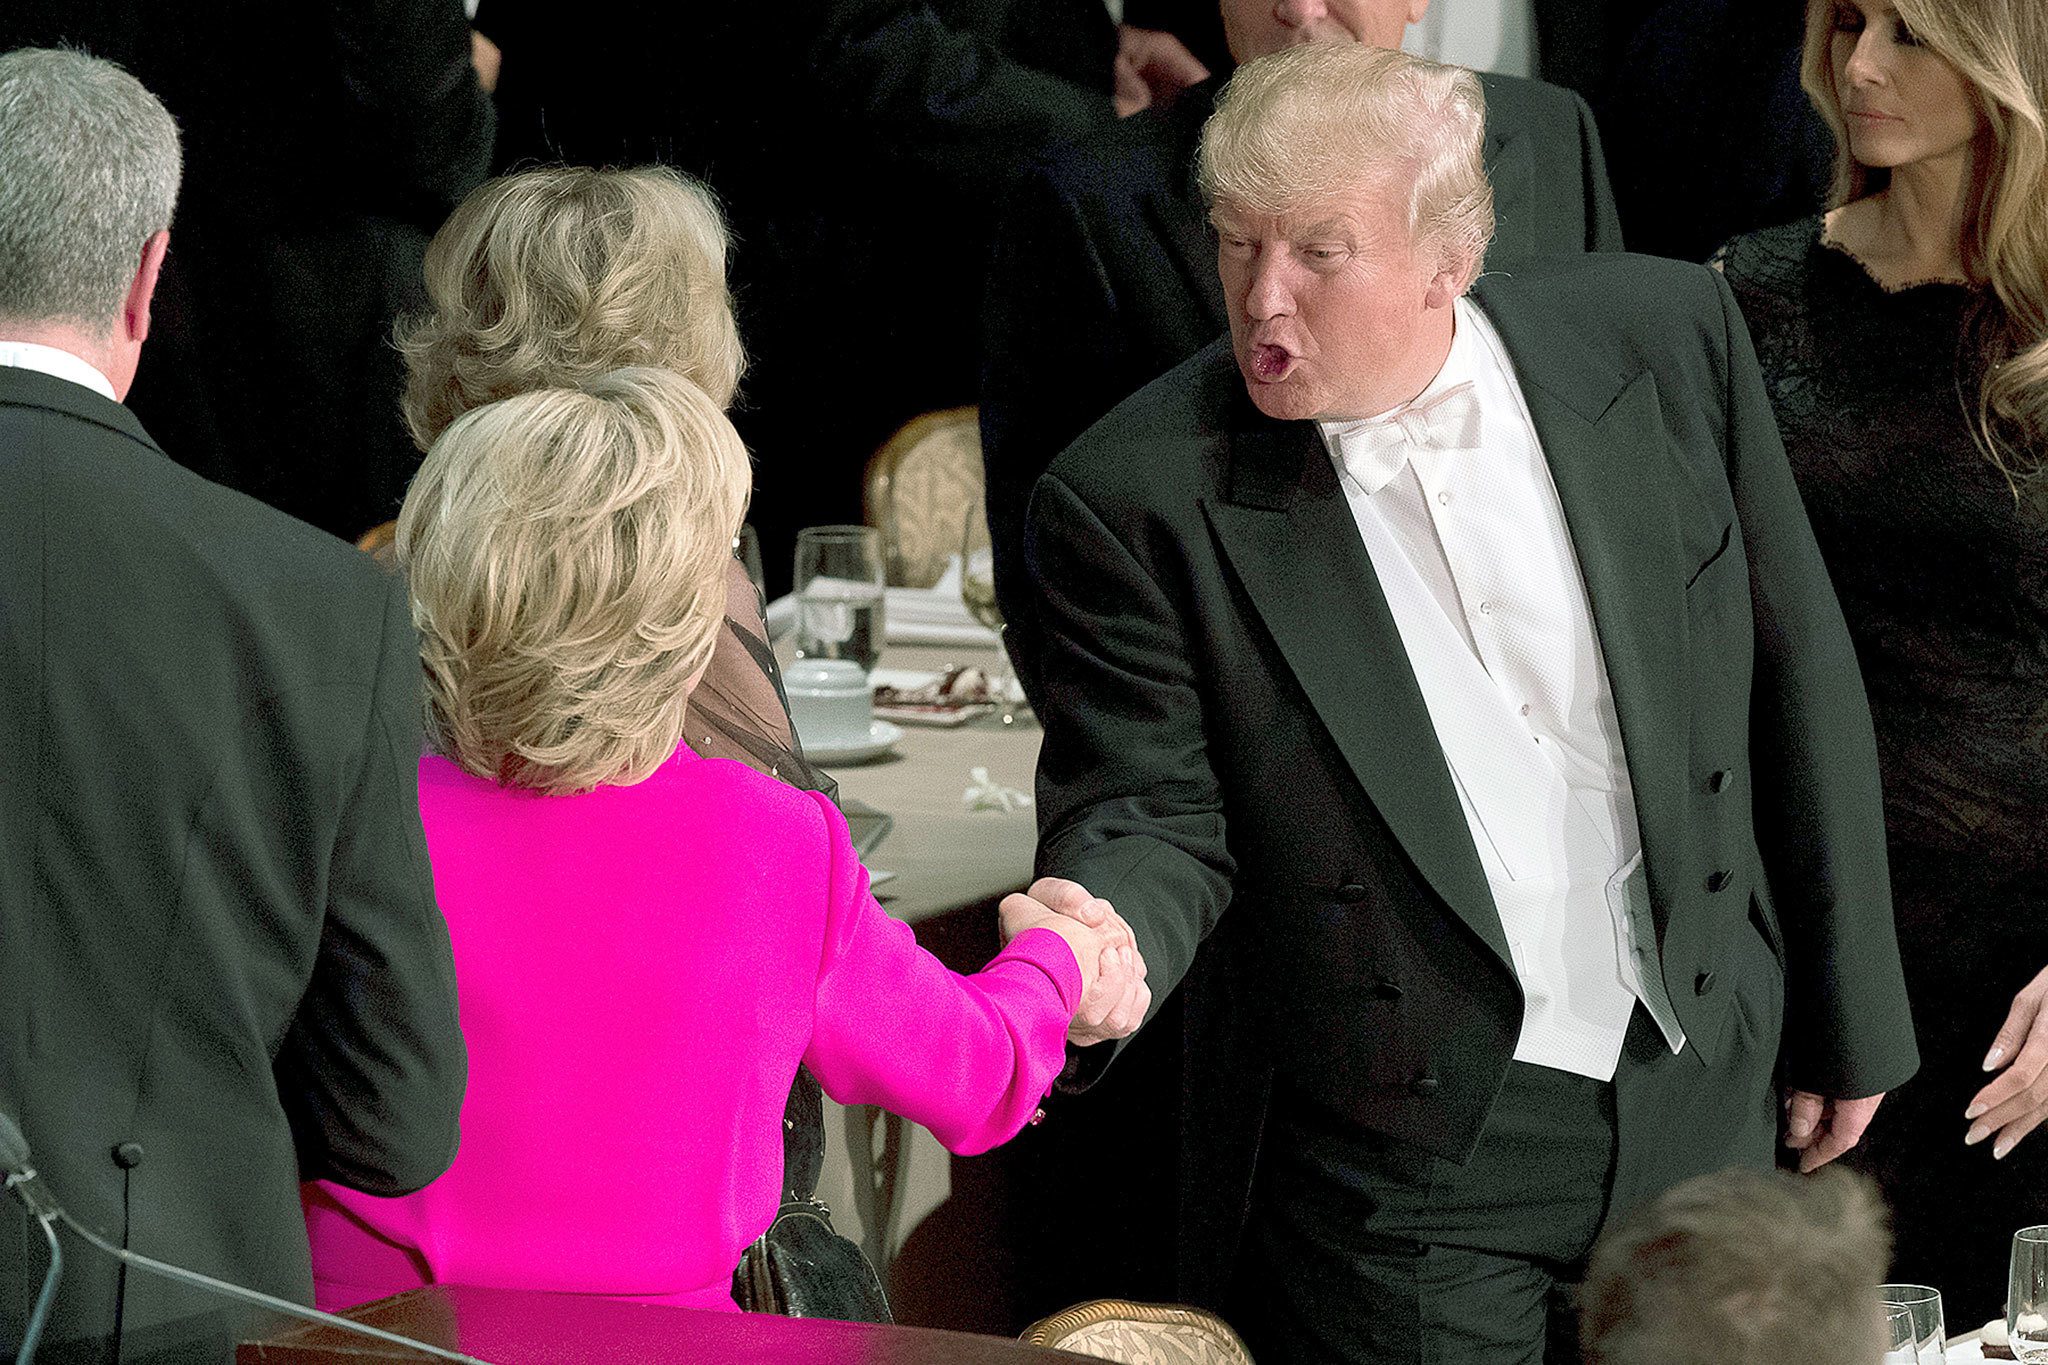 Republican presidential candidate Donald Trump (right) shakes hands with Democratic presidential candidate Hillary Clinton at the conclusion of the 71st annual Alfred E. Smith Memorial Foundation Dinner, a charity gala organized by the Archdiocese of New York, on Thursday at the Waldorf Astoria hotel. (AP Photo/Andrew Harnik)